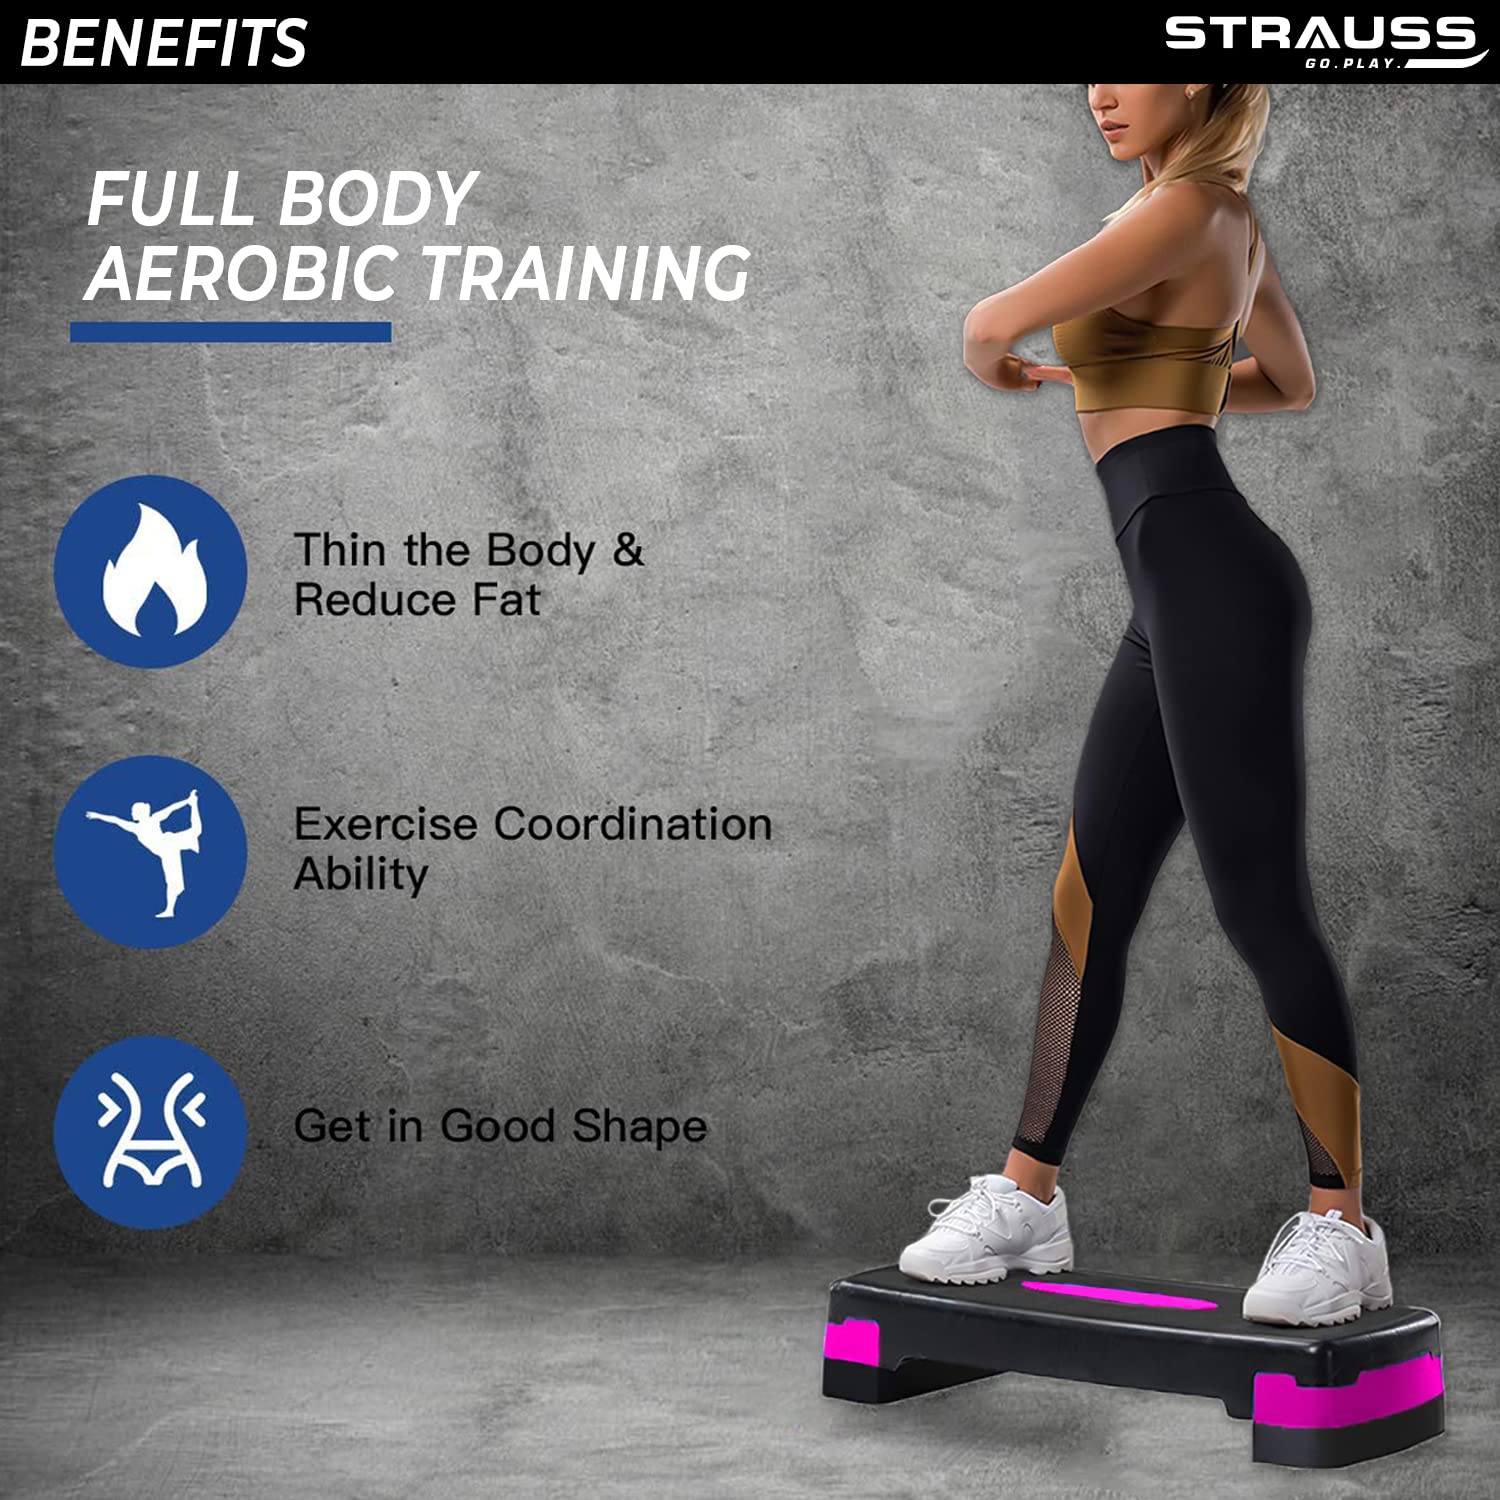 Strauss Aerobic Stepper | Two Height Level Adjustments - 4 inches and 6 inches | Slip-Resistant & Shock Absorbing Platform for Extra-Durability - Supports Upto 200 KG, (Pink)